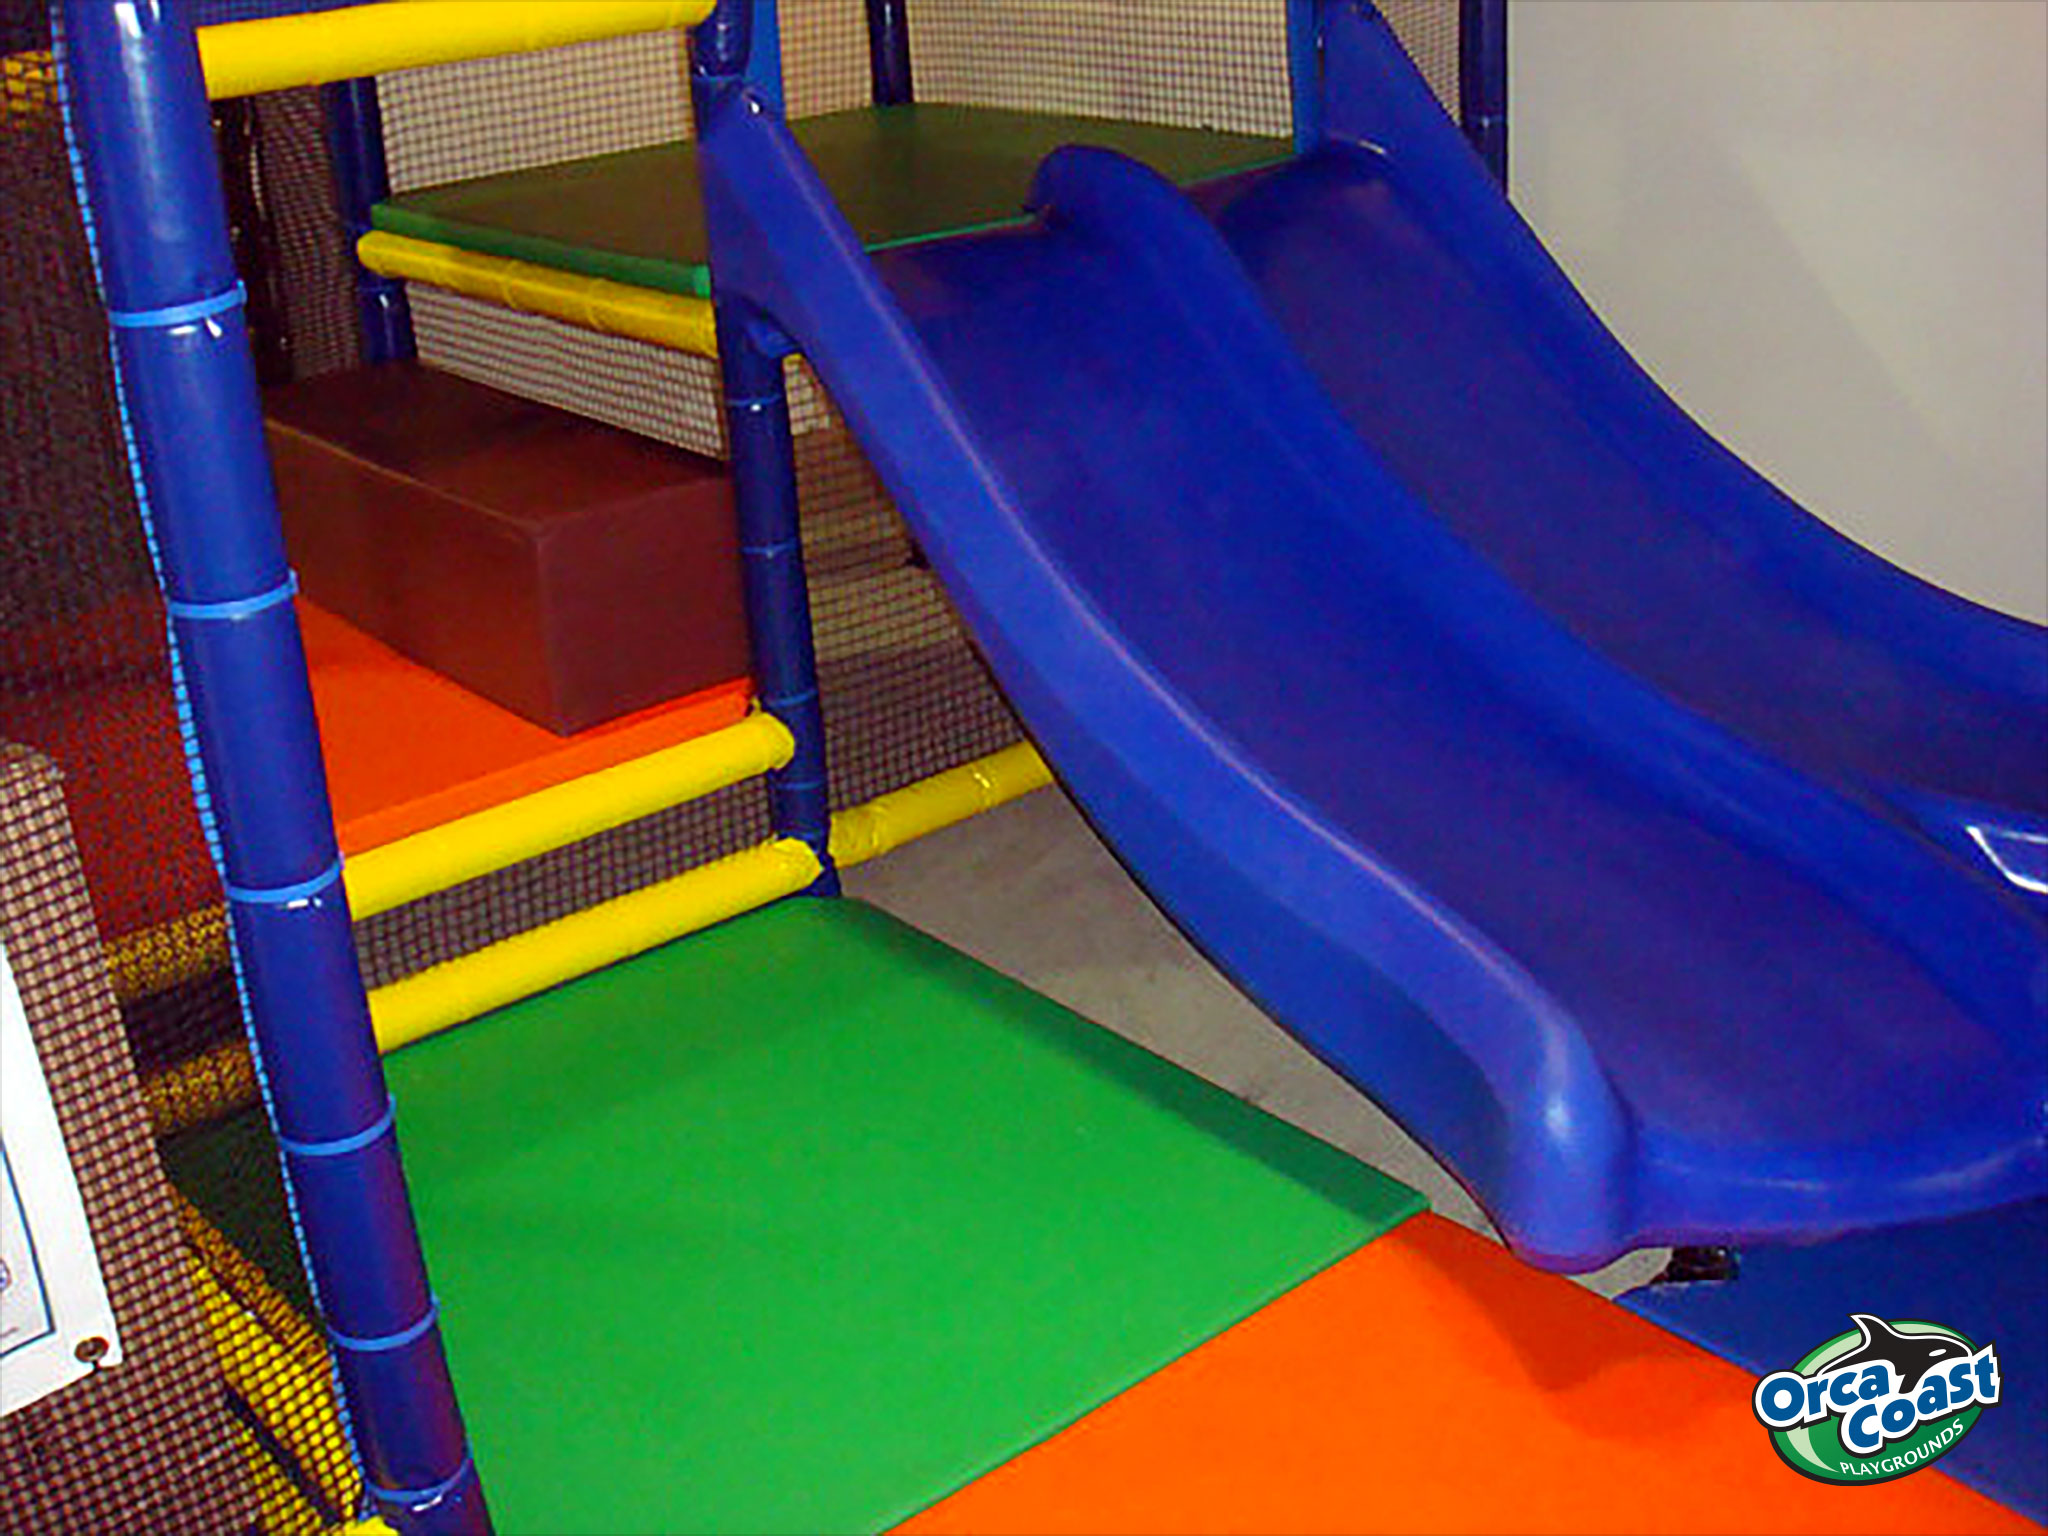 Joso’s Play and Learn Centre #1: Innovative Play in Calgary, AB